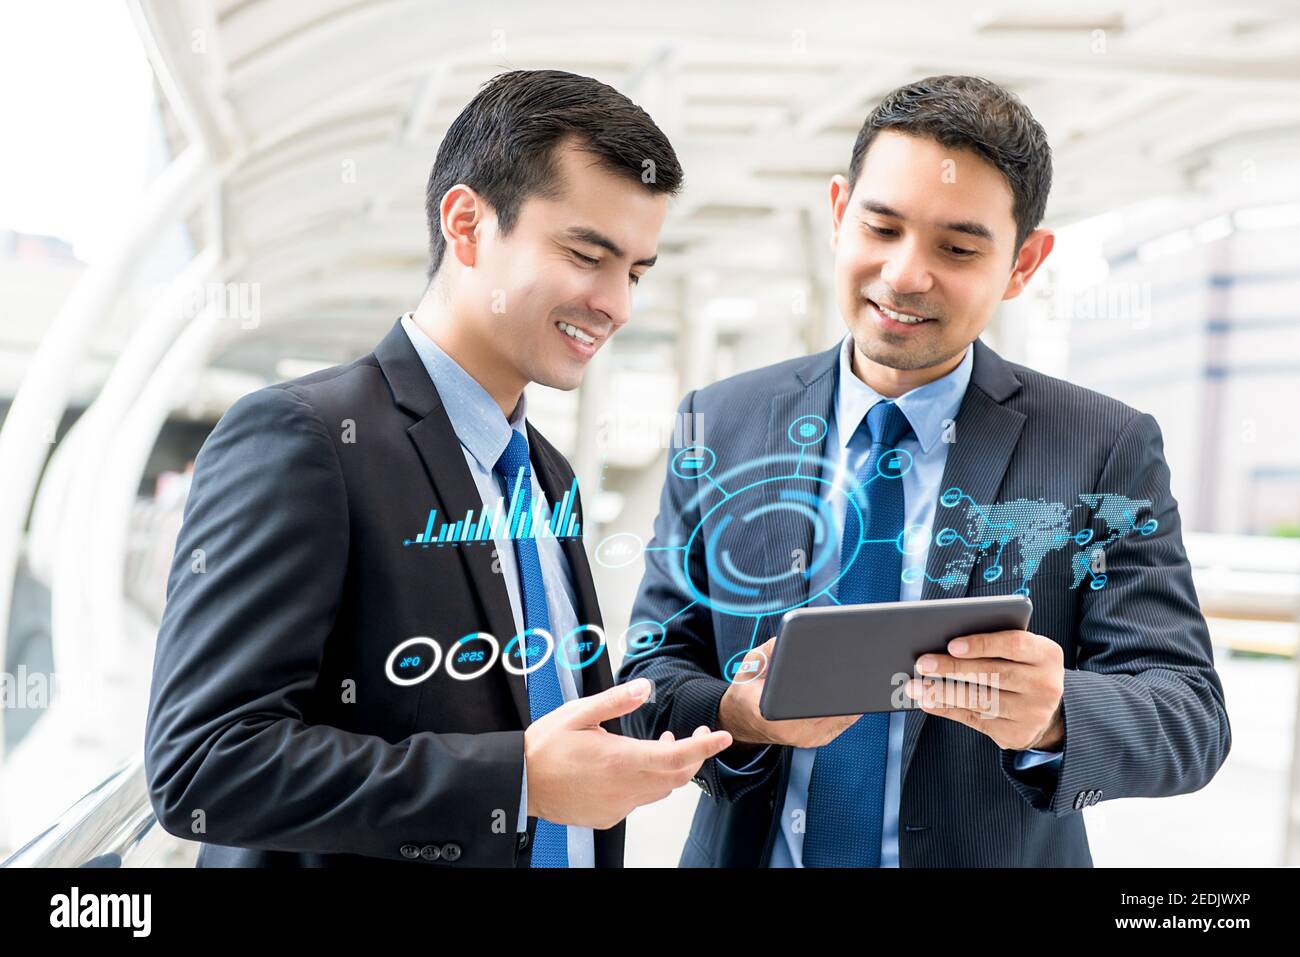 Businessmen discussing investment project using online digital information technology on tablet computer Stock Photo